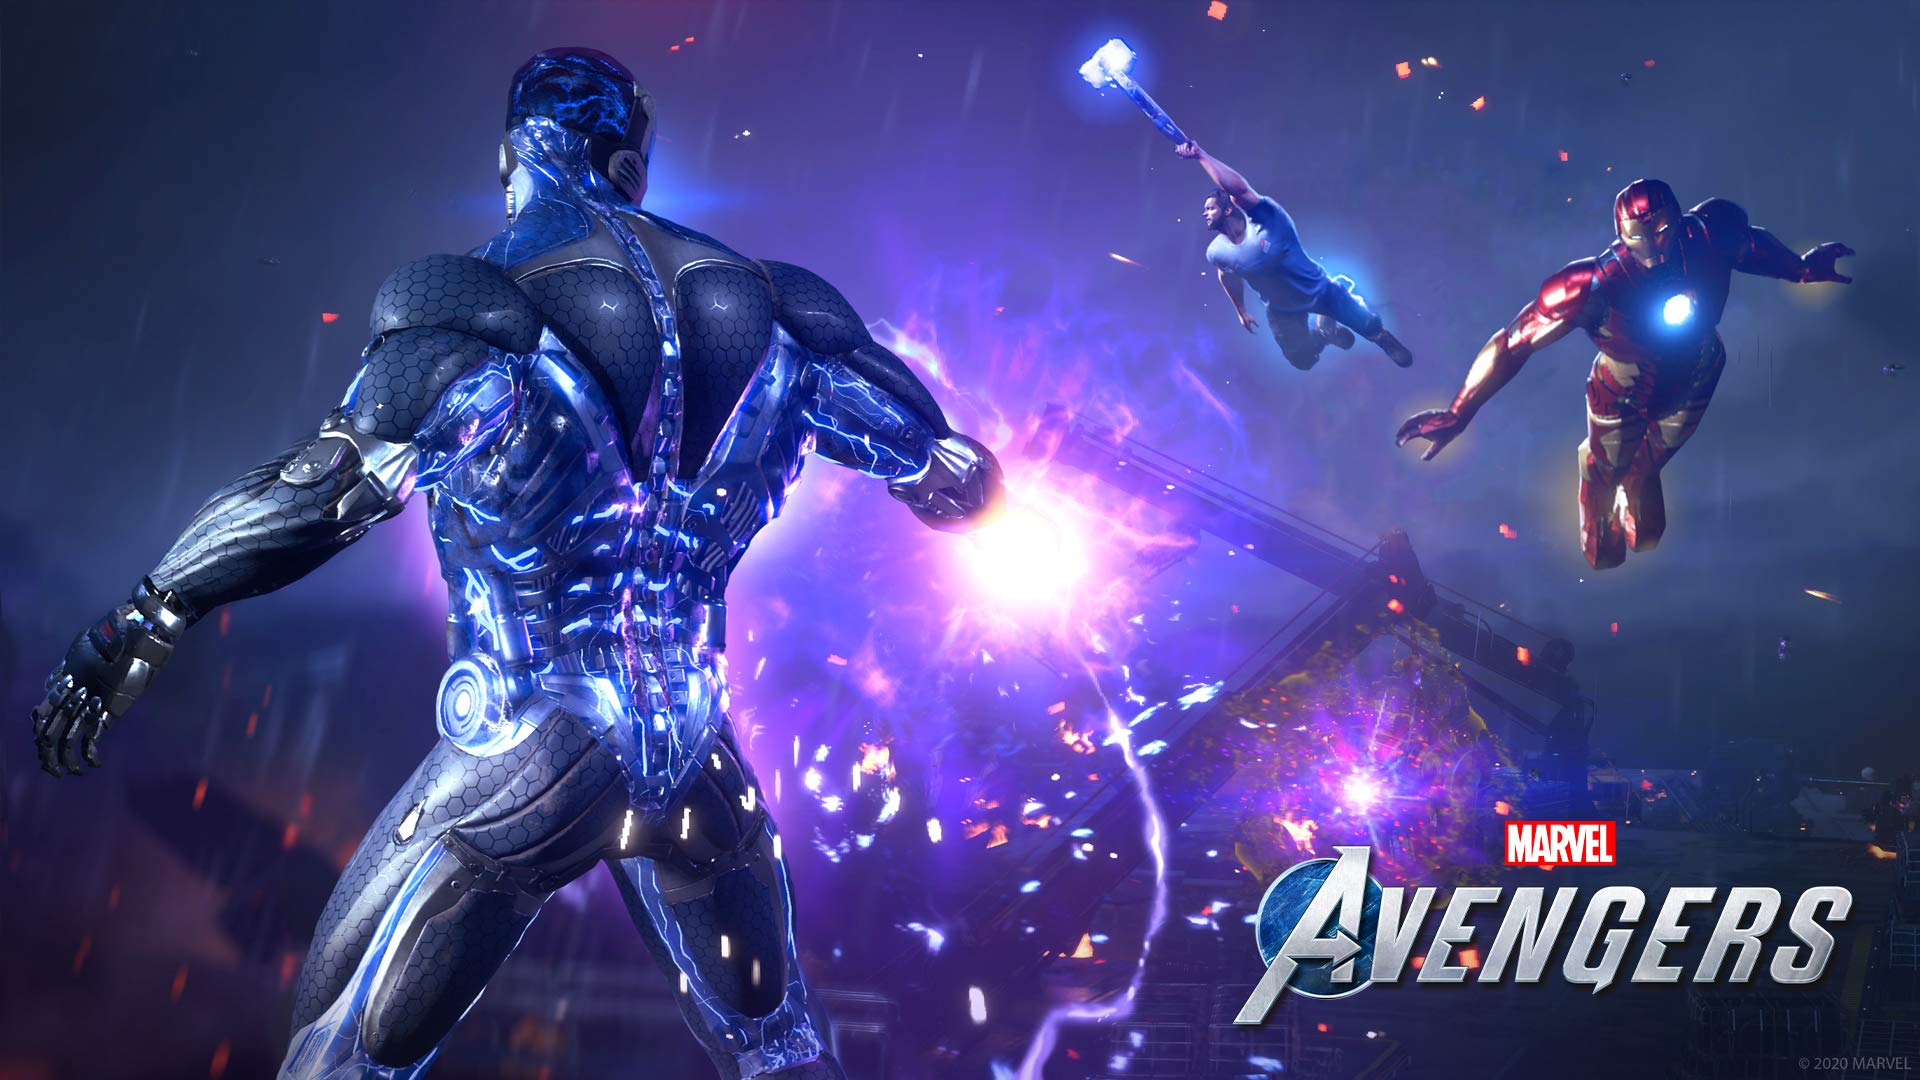 Marvel's Avengers for PlayStation 4 with Free Upgrade to the Digital PS5 Version